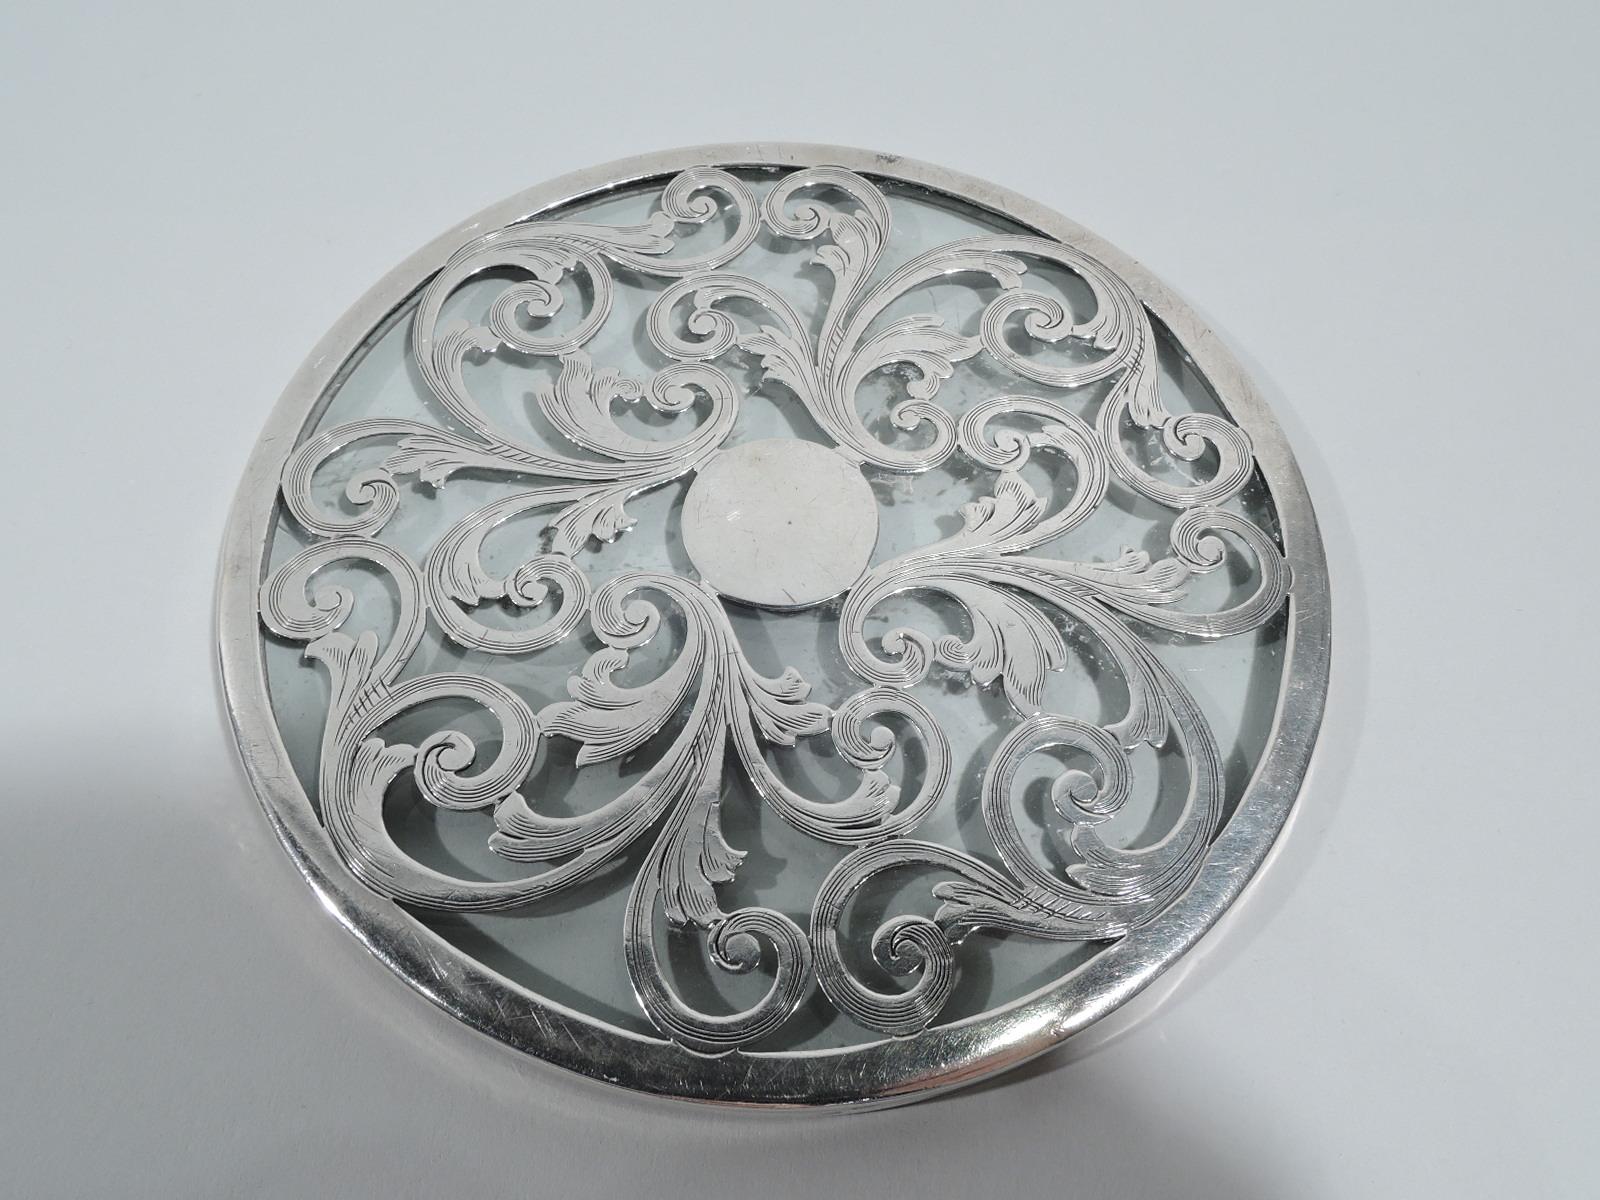 Art Nouveau glass trivet with engraved silver overlay. Round. Overlay in form of lush leafy scrolls. Central circle (vacant). Glass is clear. Marks include no. A92S and stamp for The Merrill Shops, a New York retailer active in the late 19th and